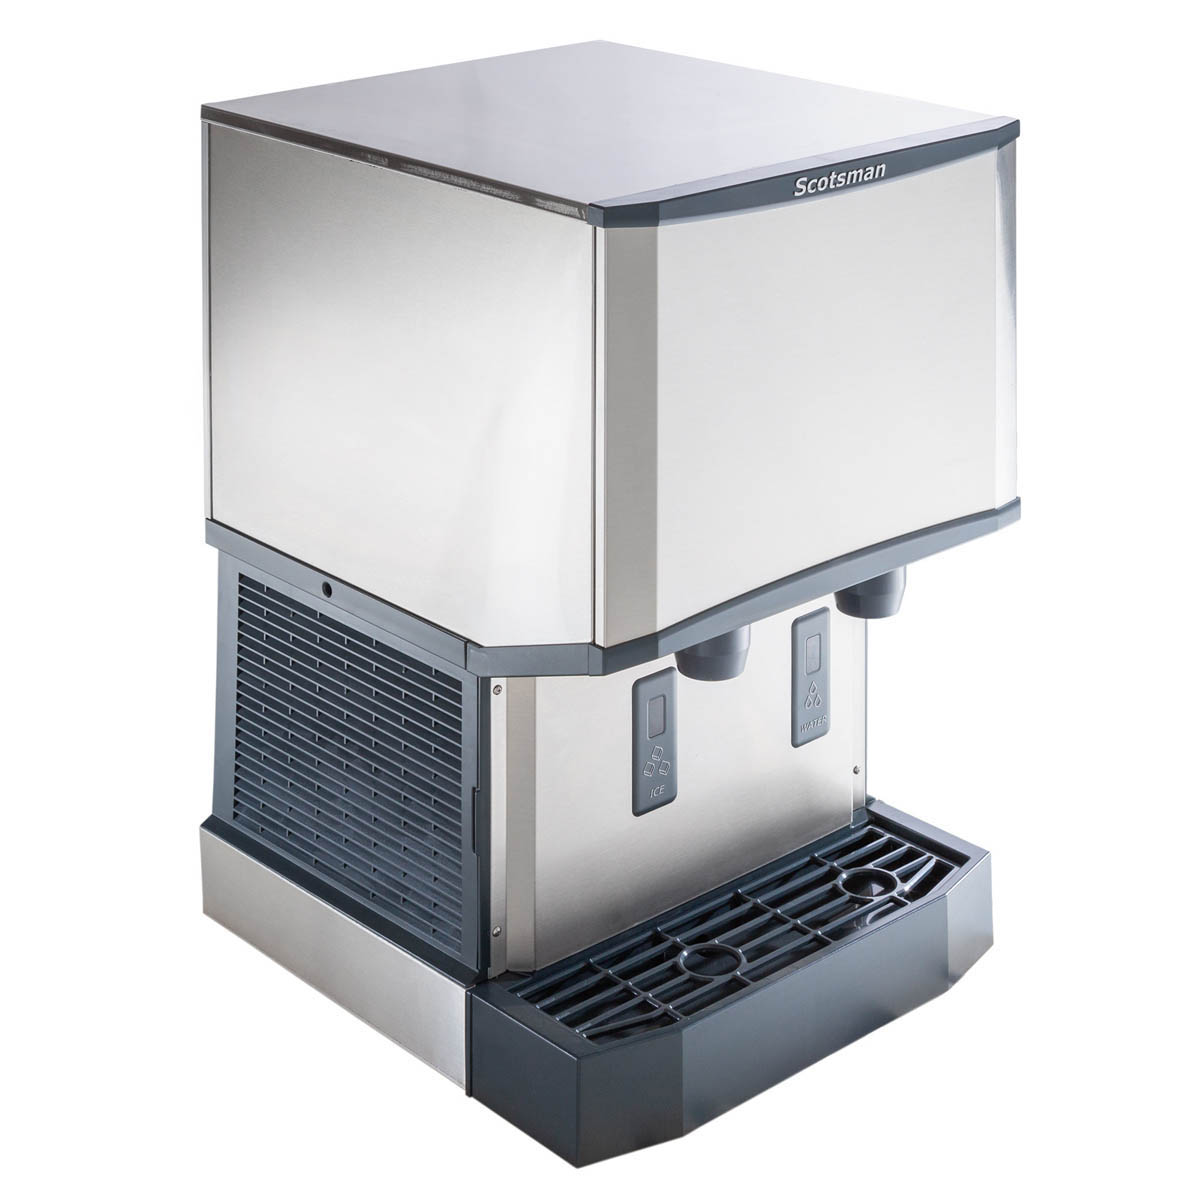 With Scotsman HID525A-1 Easy to Serve Ice For Your Customers, Chef's Deal